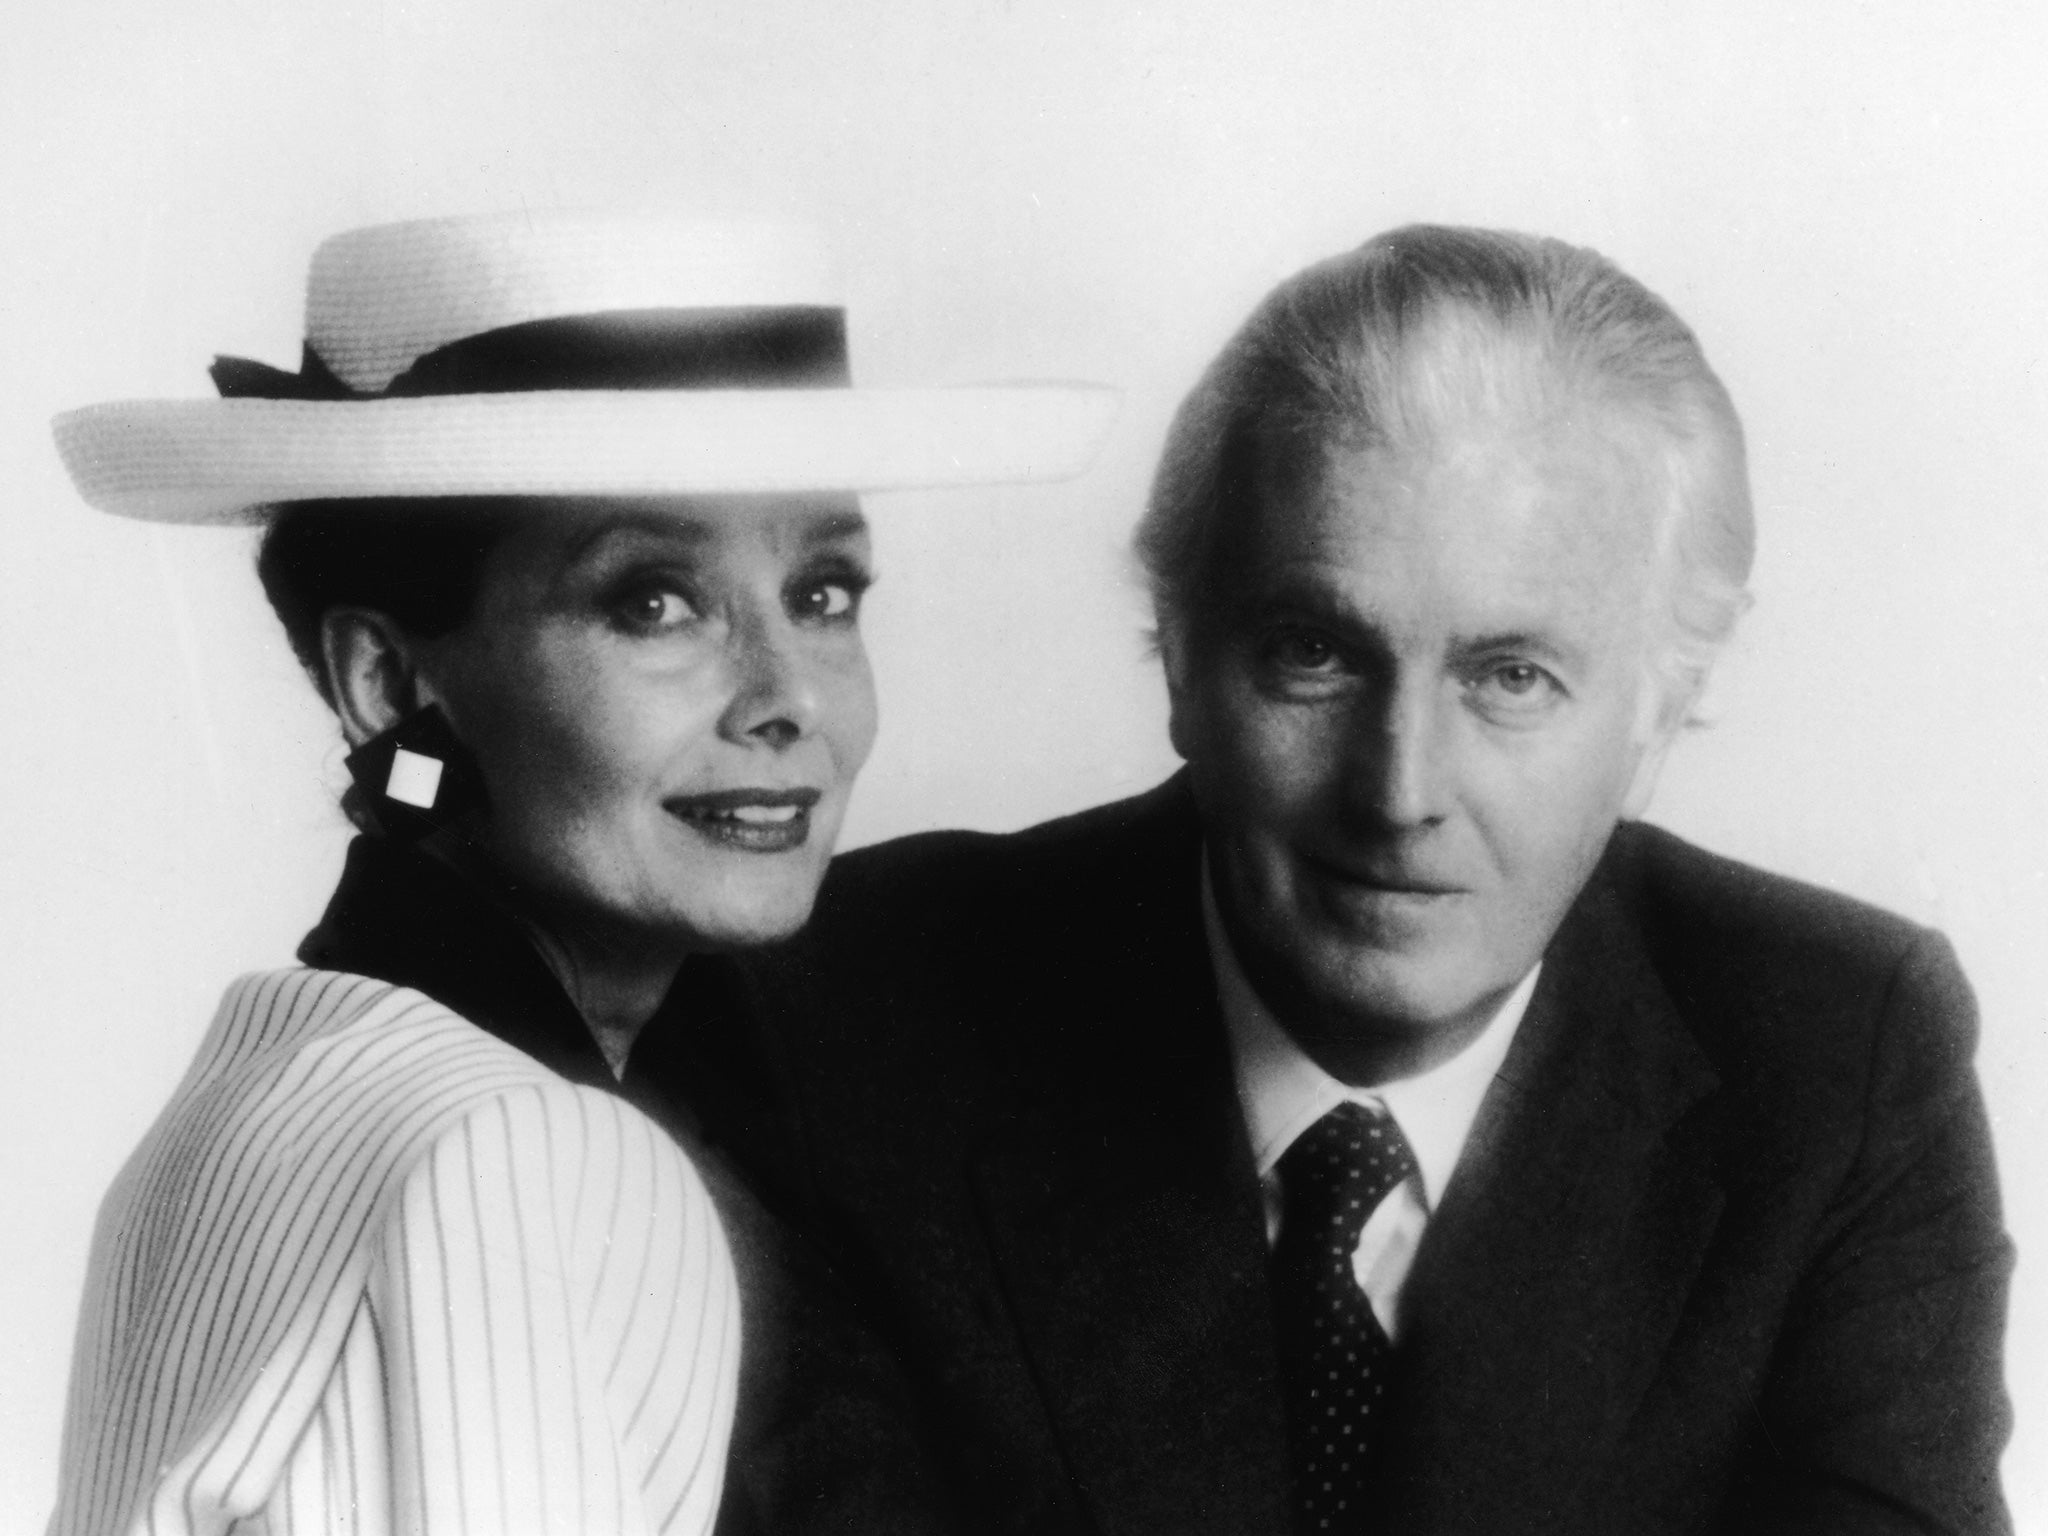 Audrey Hepburn with Hubert De Givenchy, whose well-cut black tuxedo is a 'timeless look'